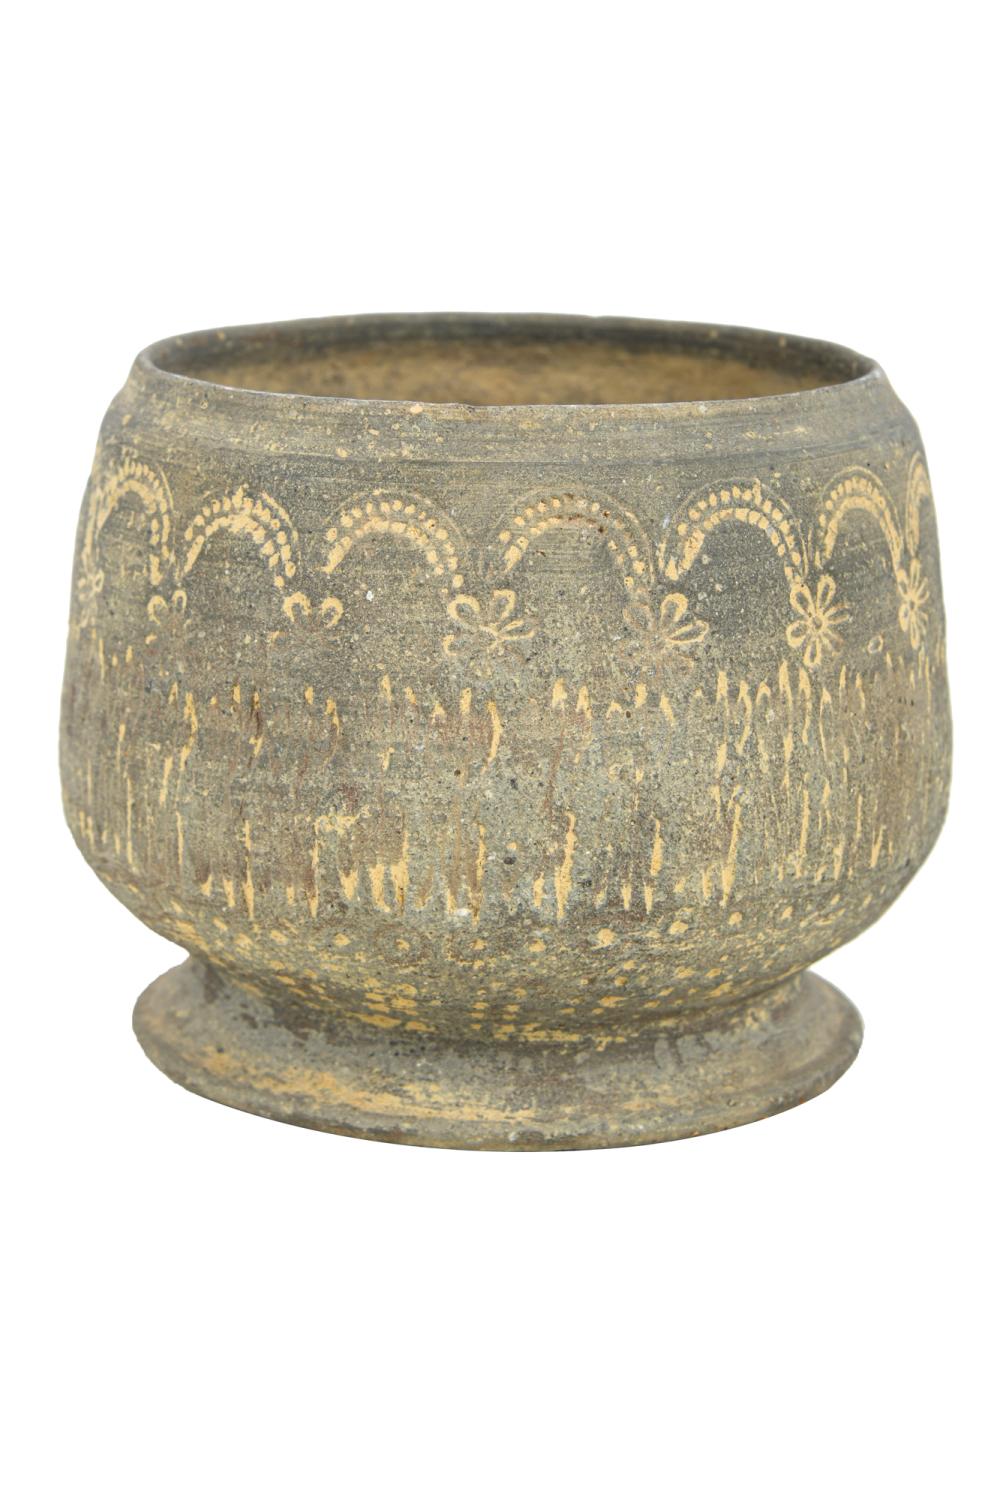 KOREAN FOOTED BOWL4 1/4 inches